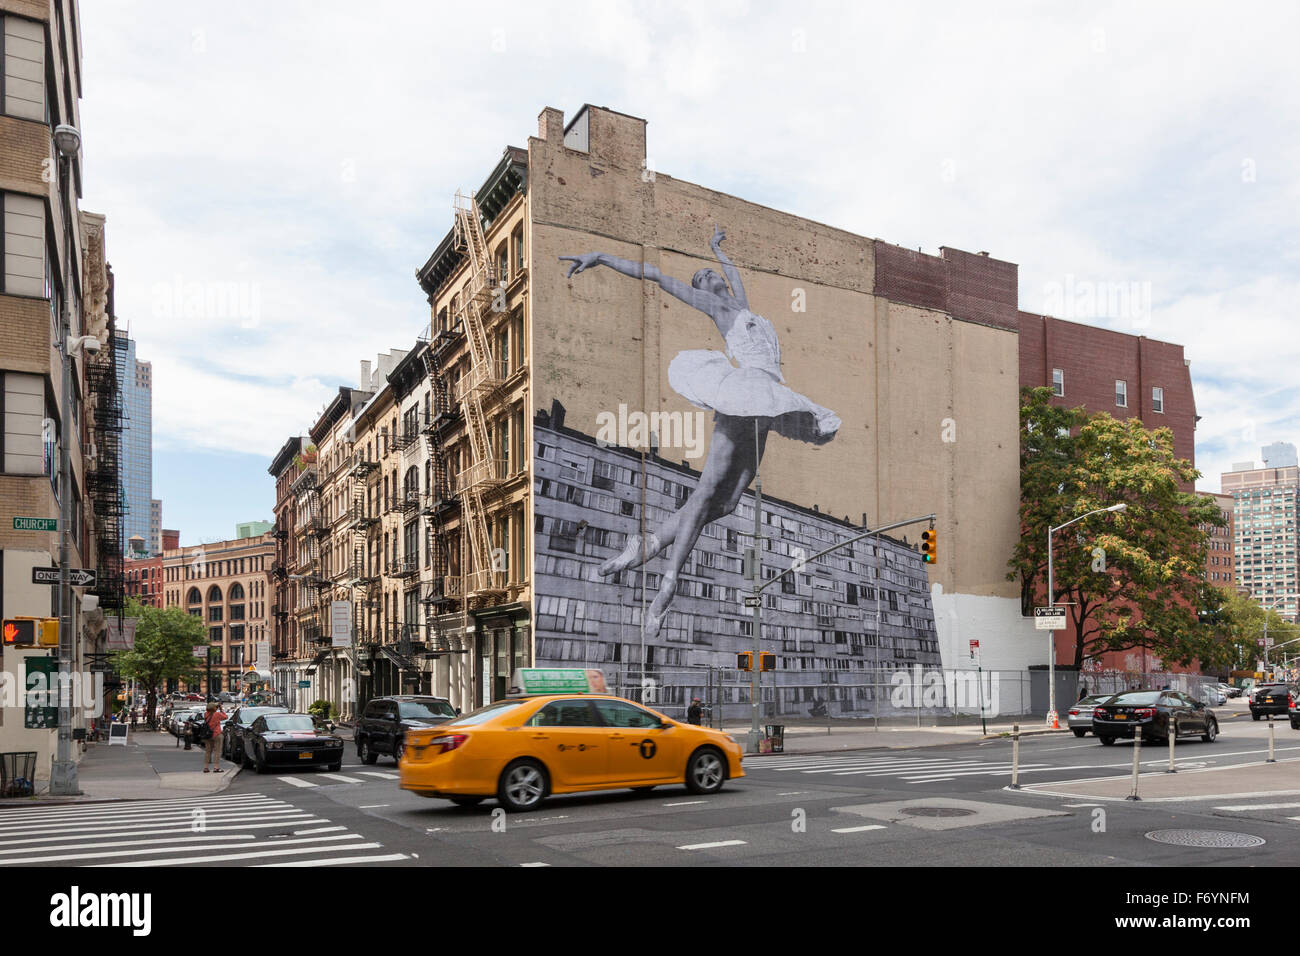 Mural of the ballerina Lauren Lovette, by French street artist JR, on the side of the building at 100 Franklin St, Tribeca, NYC Stock Photo